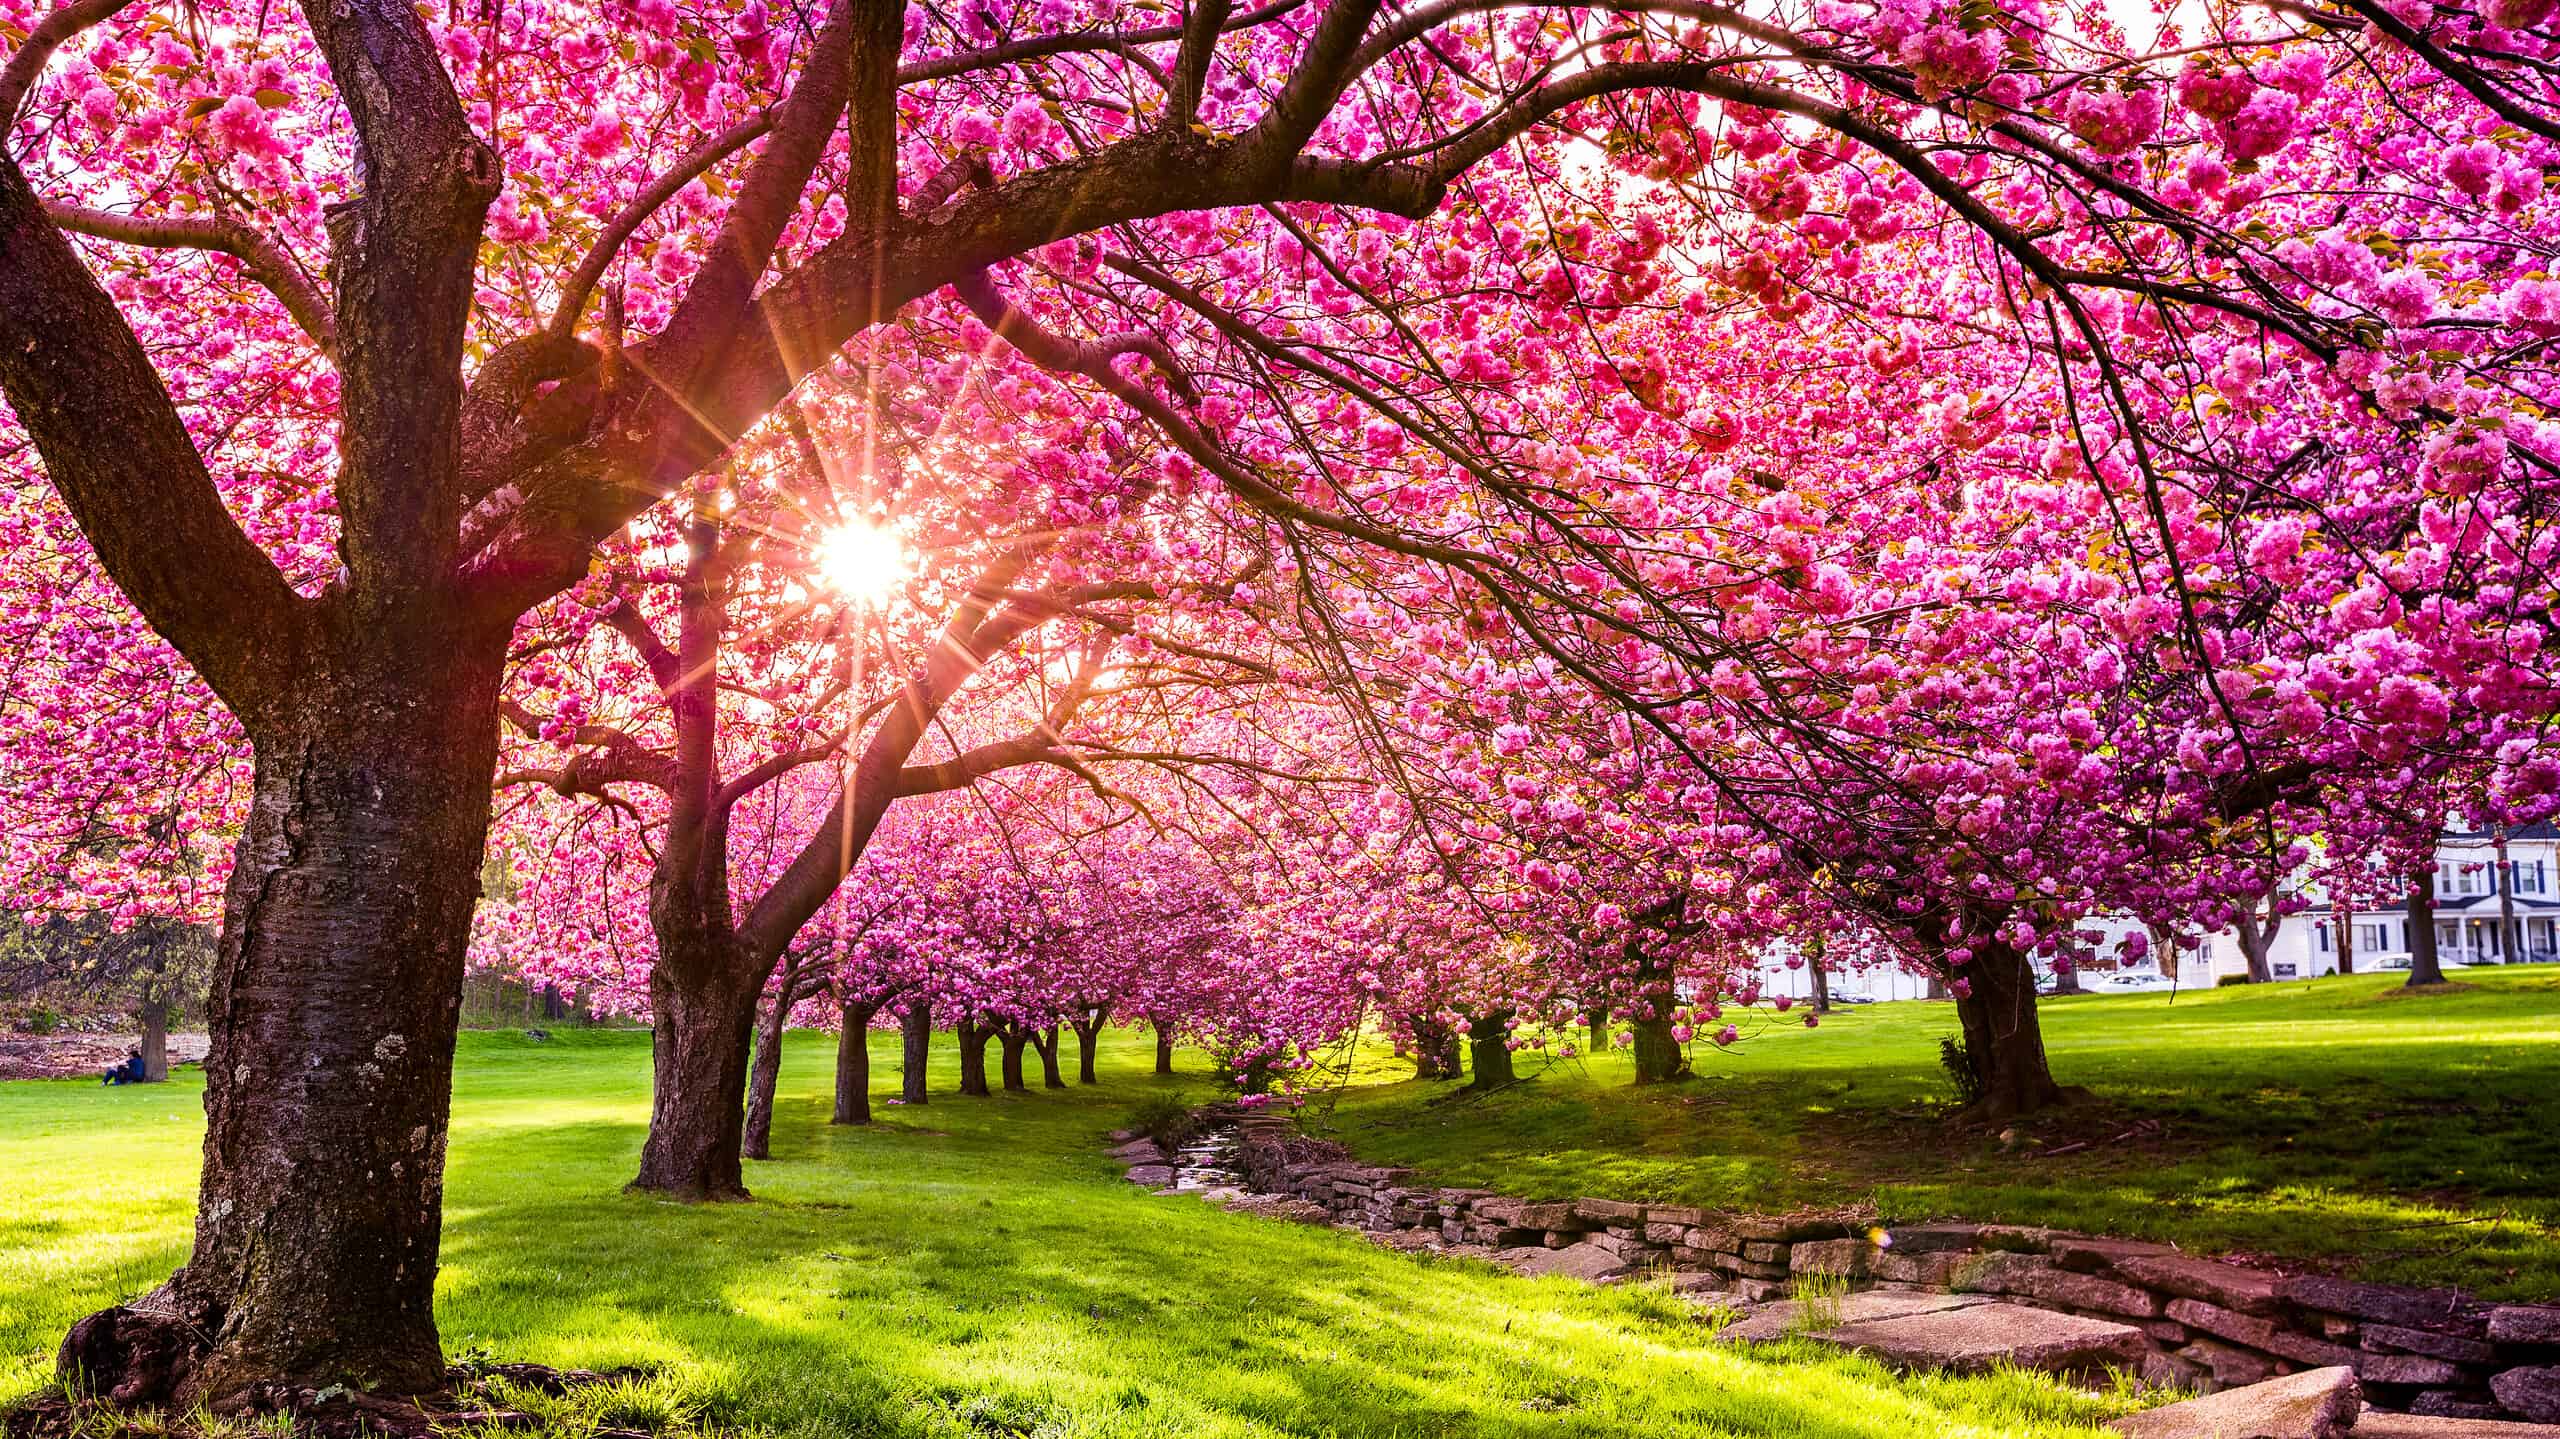 <p>A beautiful place year-round, Dover's Hurd Park in New Jersey has a gorgeous display of cherry blossoms each spring.</p><p>Sharks, lions, alligators, and more! Don’t miss today’s latest and most exciting animal news. <strong><a href="https://www.msn.com/en-us/channel/source/AZ%20Animals%20US/sr-vid-7etr9q8xun6k6508c3nufaum0de3dqktiq6h27ddeagnfug30wka">Click here to access the A-Z Animals profile page</a> and be sure to hit the <em>Follow</em> button here or at the top of this article!</strong></p> <p>Have feedback? Add a comment below!</p>